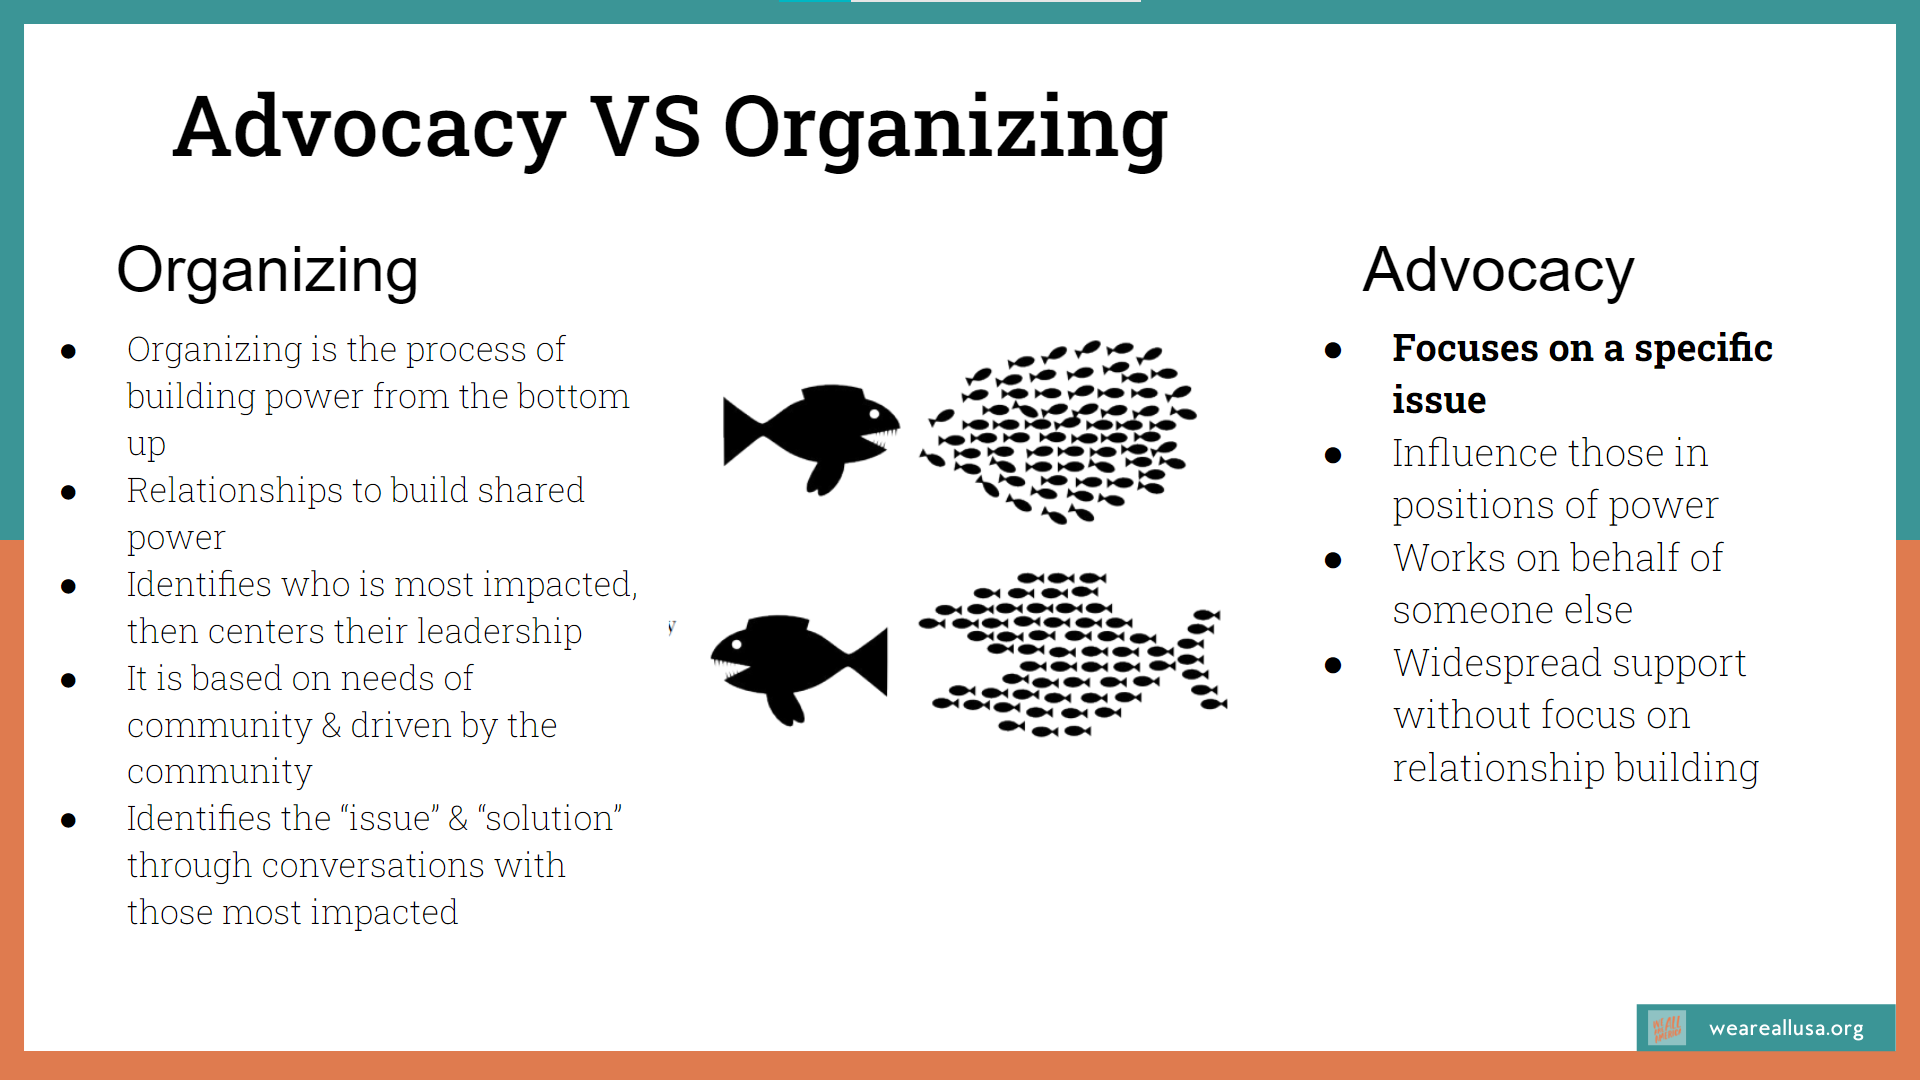 Advocacy vs. Organizing. Organizing: Organizing is the process of building power from the bottom up. It uses relationships to build shared power. Identifies who is most impacted, then centers their leadership. It is based on needs of community & driven by the community. Identifies the “issue” & “solution” through conversations with those most impacted. Advocacy: Focuses on a specific issue. It is used to influence those in positions of power. Works on behalf of someone else. Widespread support without focus on relationship building.